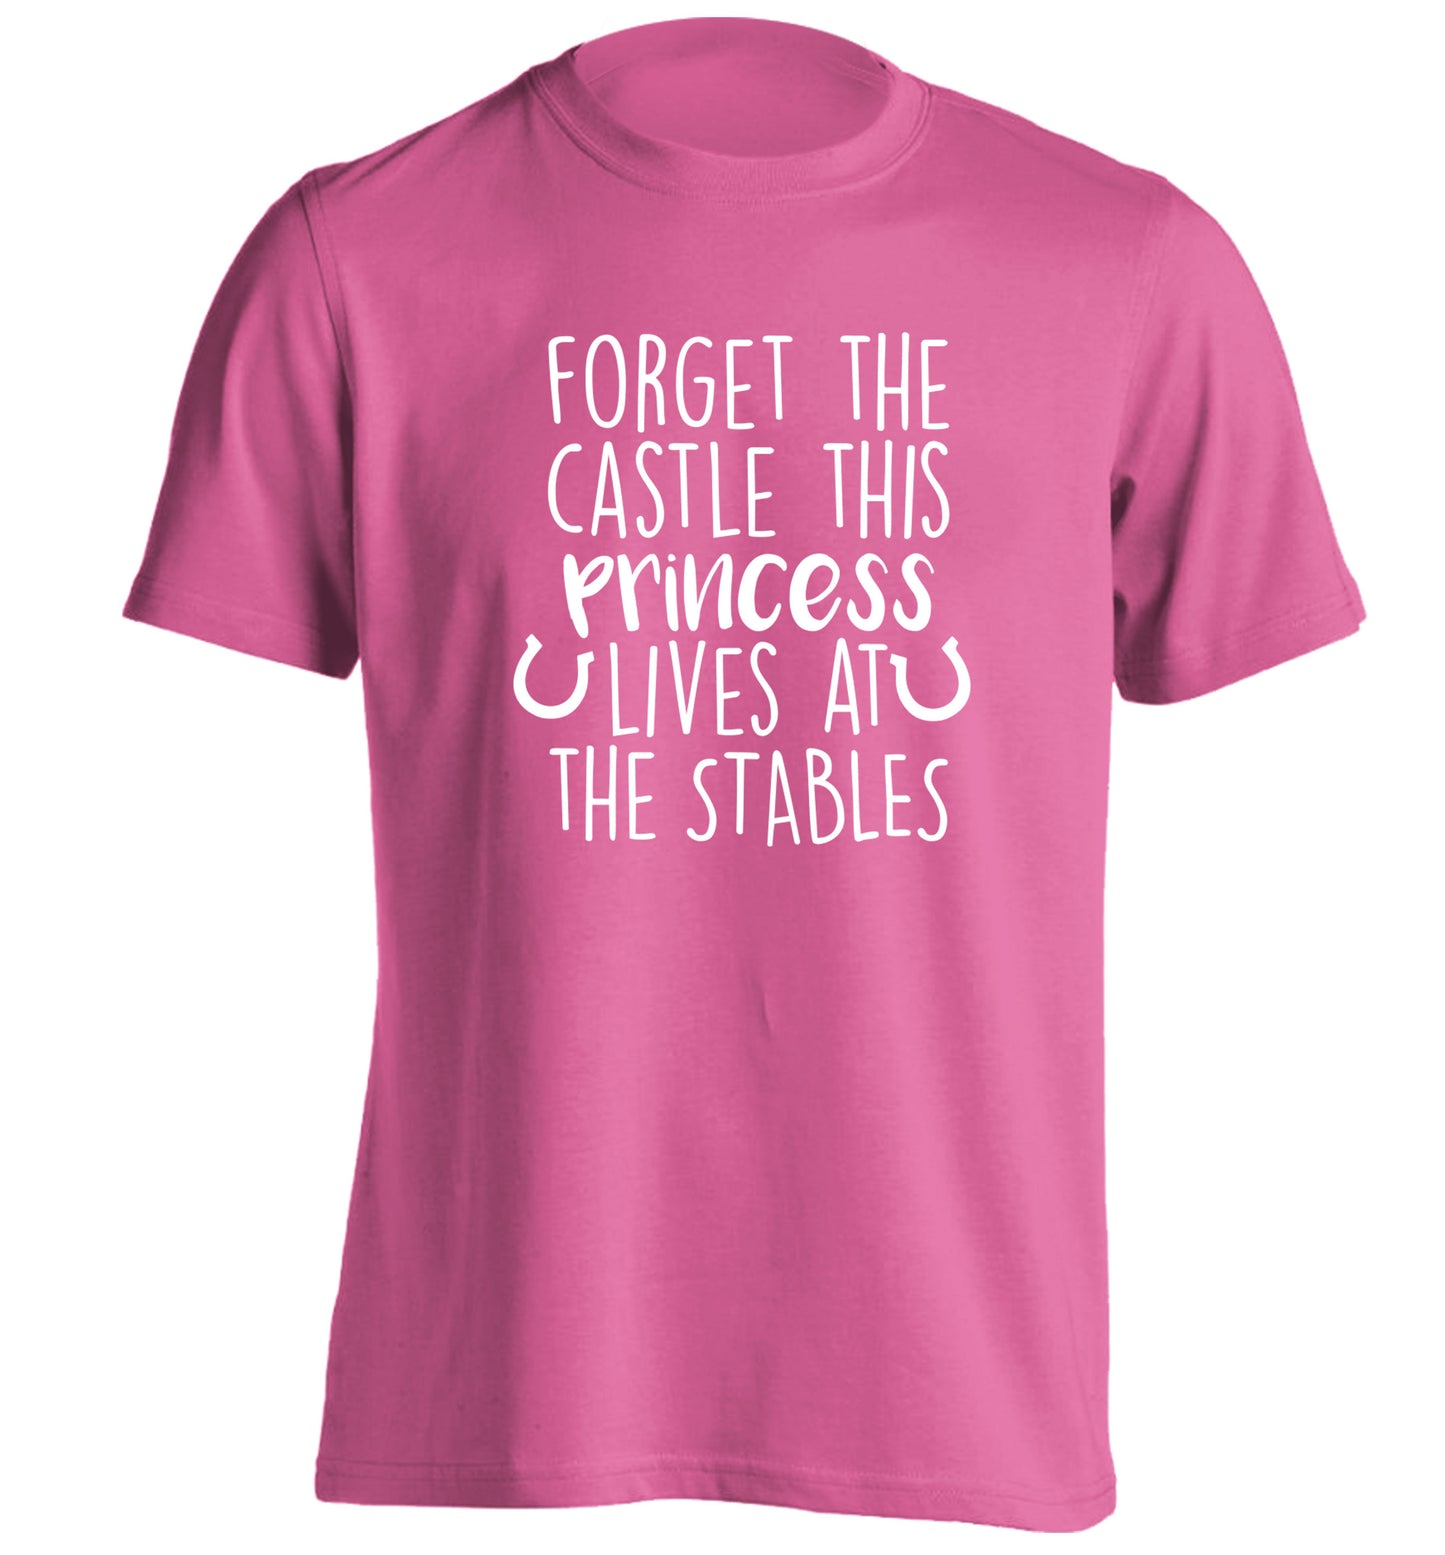 Forget the castle this princess lives at the stables adults unisex pink Tshirt 2XL